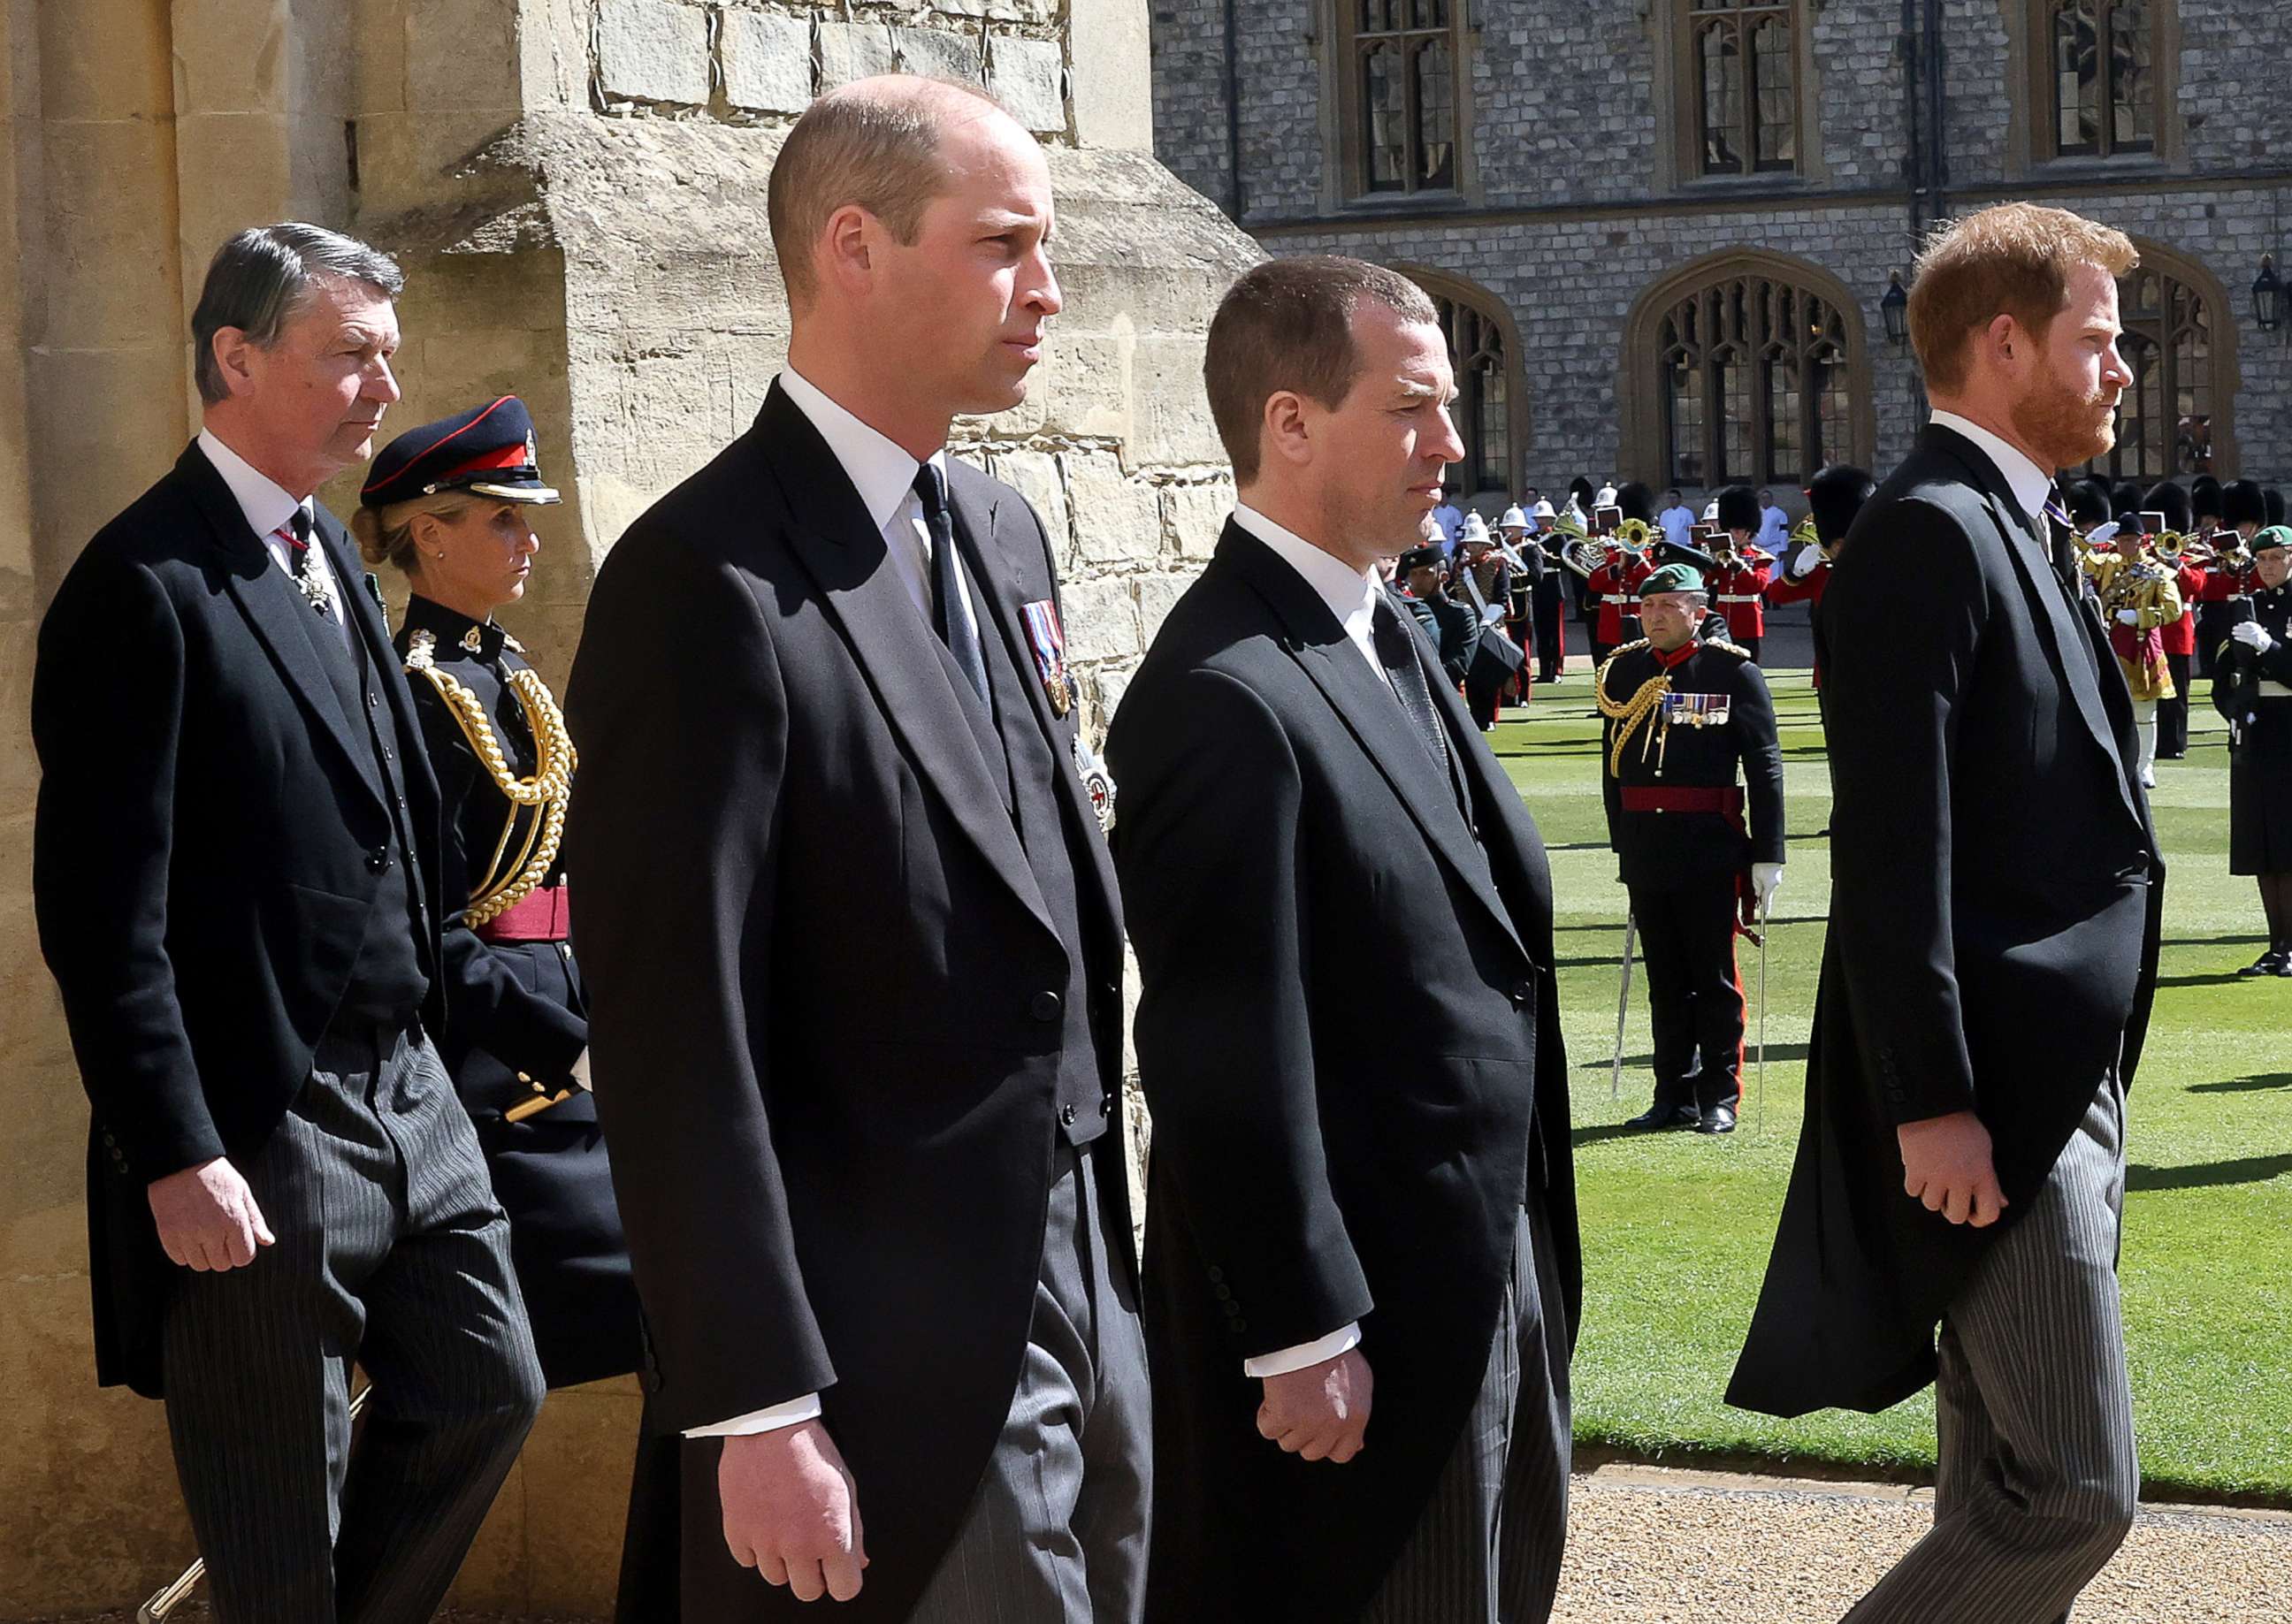 PHOTO: Vice-Admiral Sir Timothy Laurence, Prince William, Duke of Cambridge, Peter Phillips, Prince Harry, Duke of Sussex follow Prince Philip during the Ceremonial Procession at Windsor Castle, April 17, 2021, in Windsor, England.